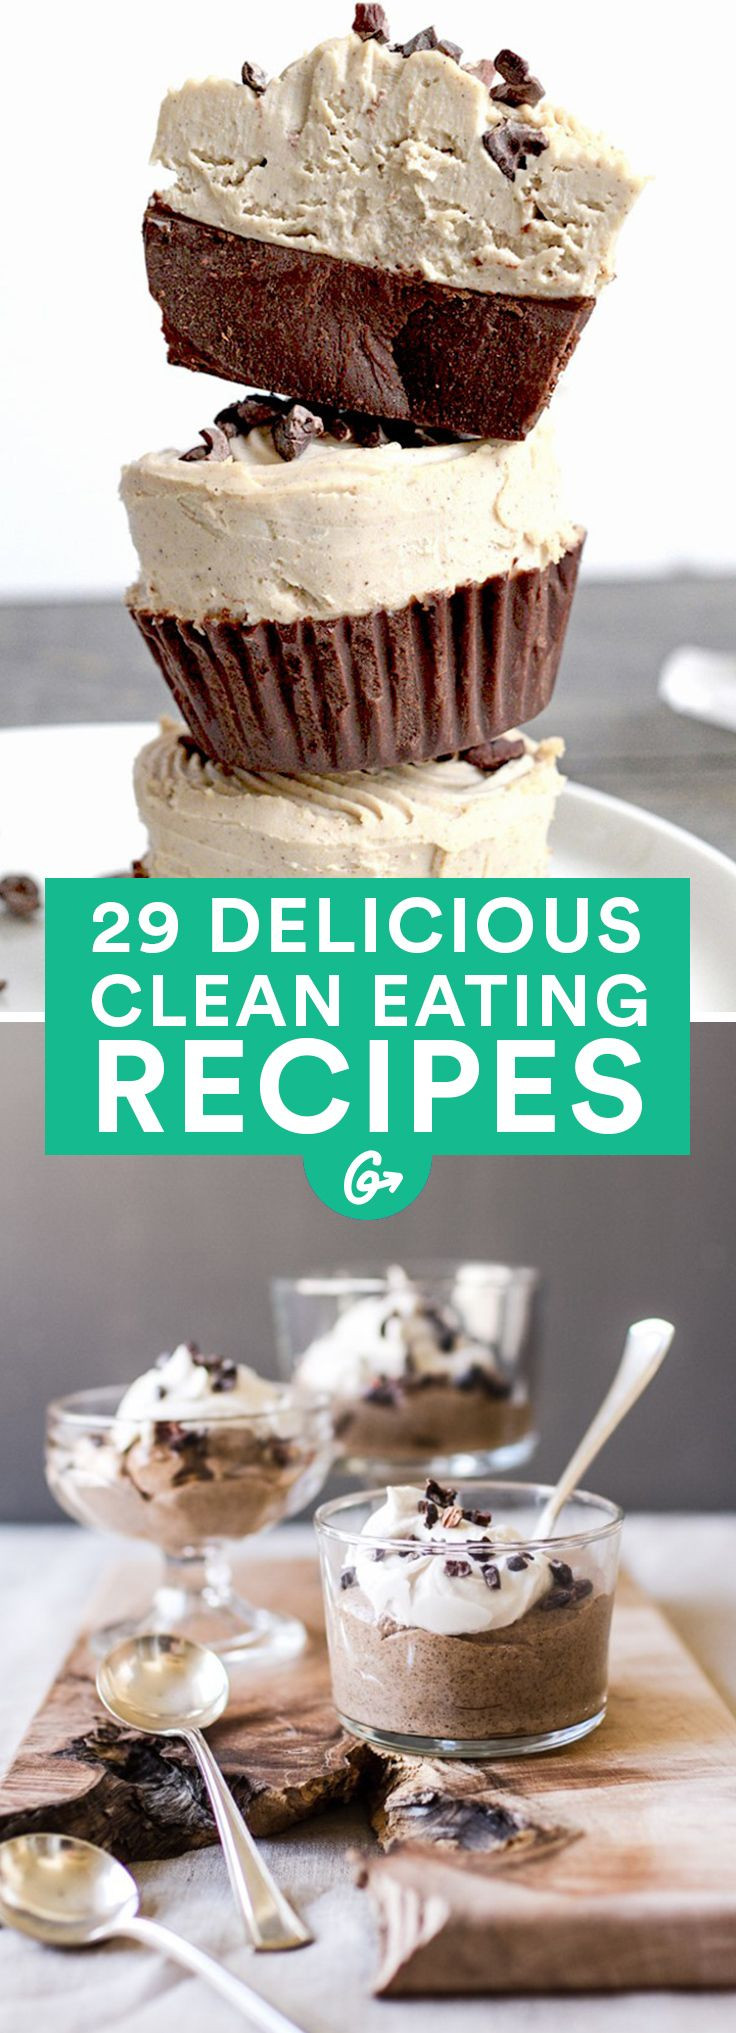 Clean Eating Desserts
 The 25 best Clean eating ideas on Pinterest